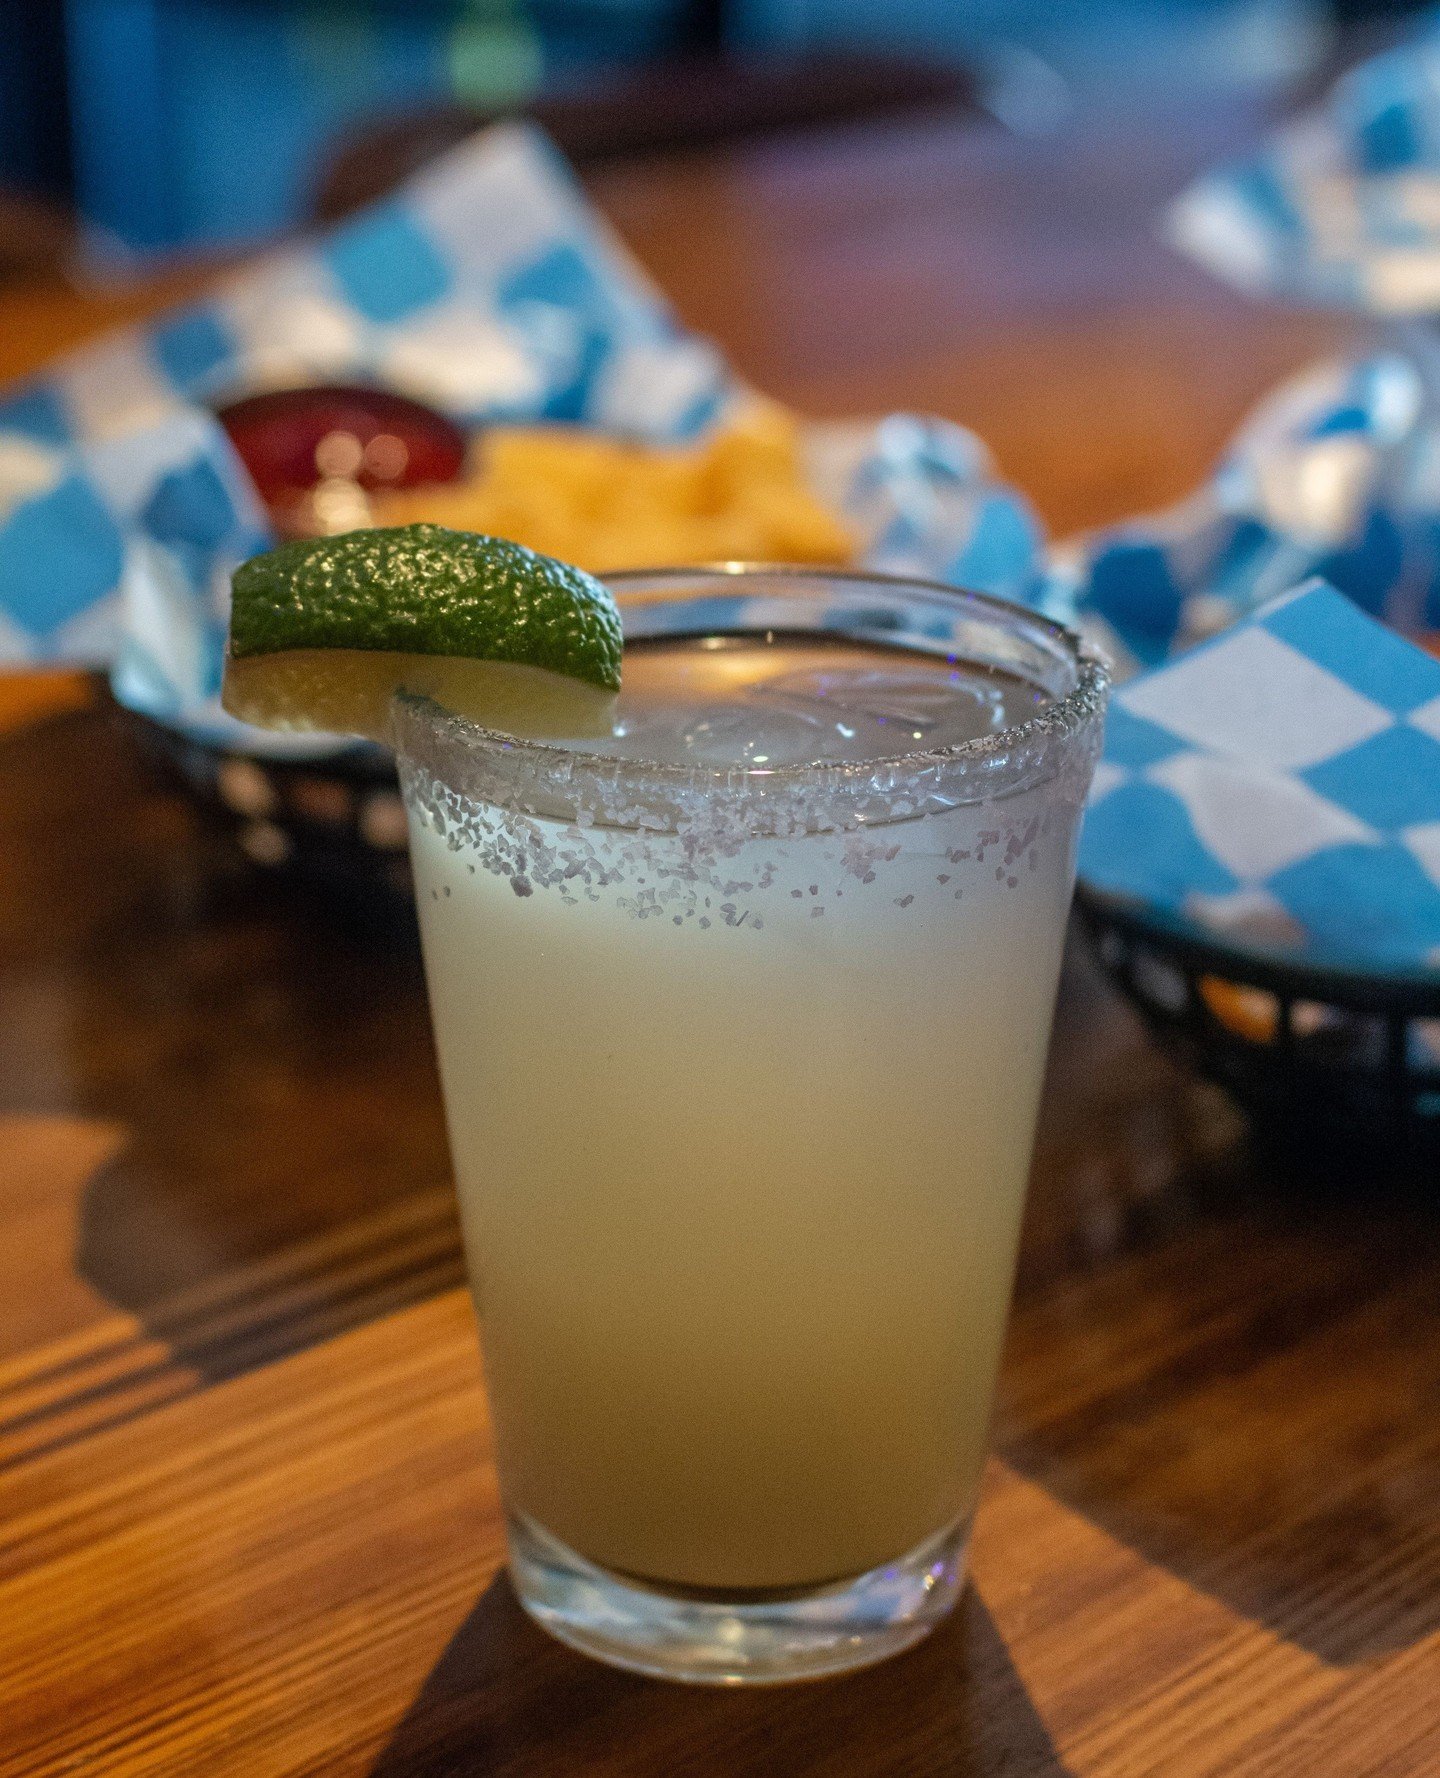 Did somebody say Margaritas? It&rsquo;s Taco Tuesday at Moonlighter! Deals on Margs, Tequila Shots and Tacos. The Cubs game is on at 6:10pm and the White Sox face off against the Twins at home at 6:40. We&rsquo;re open from 5pm - Midnight for all you